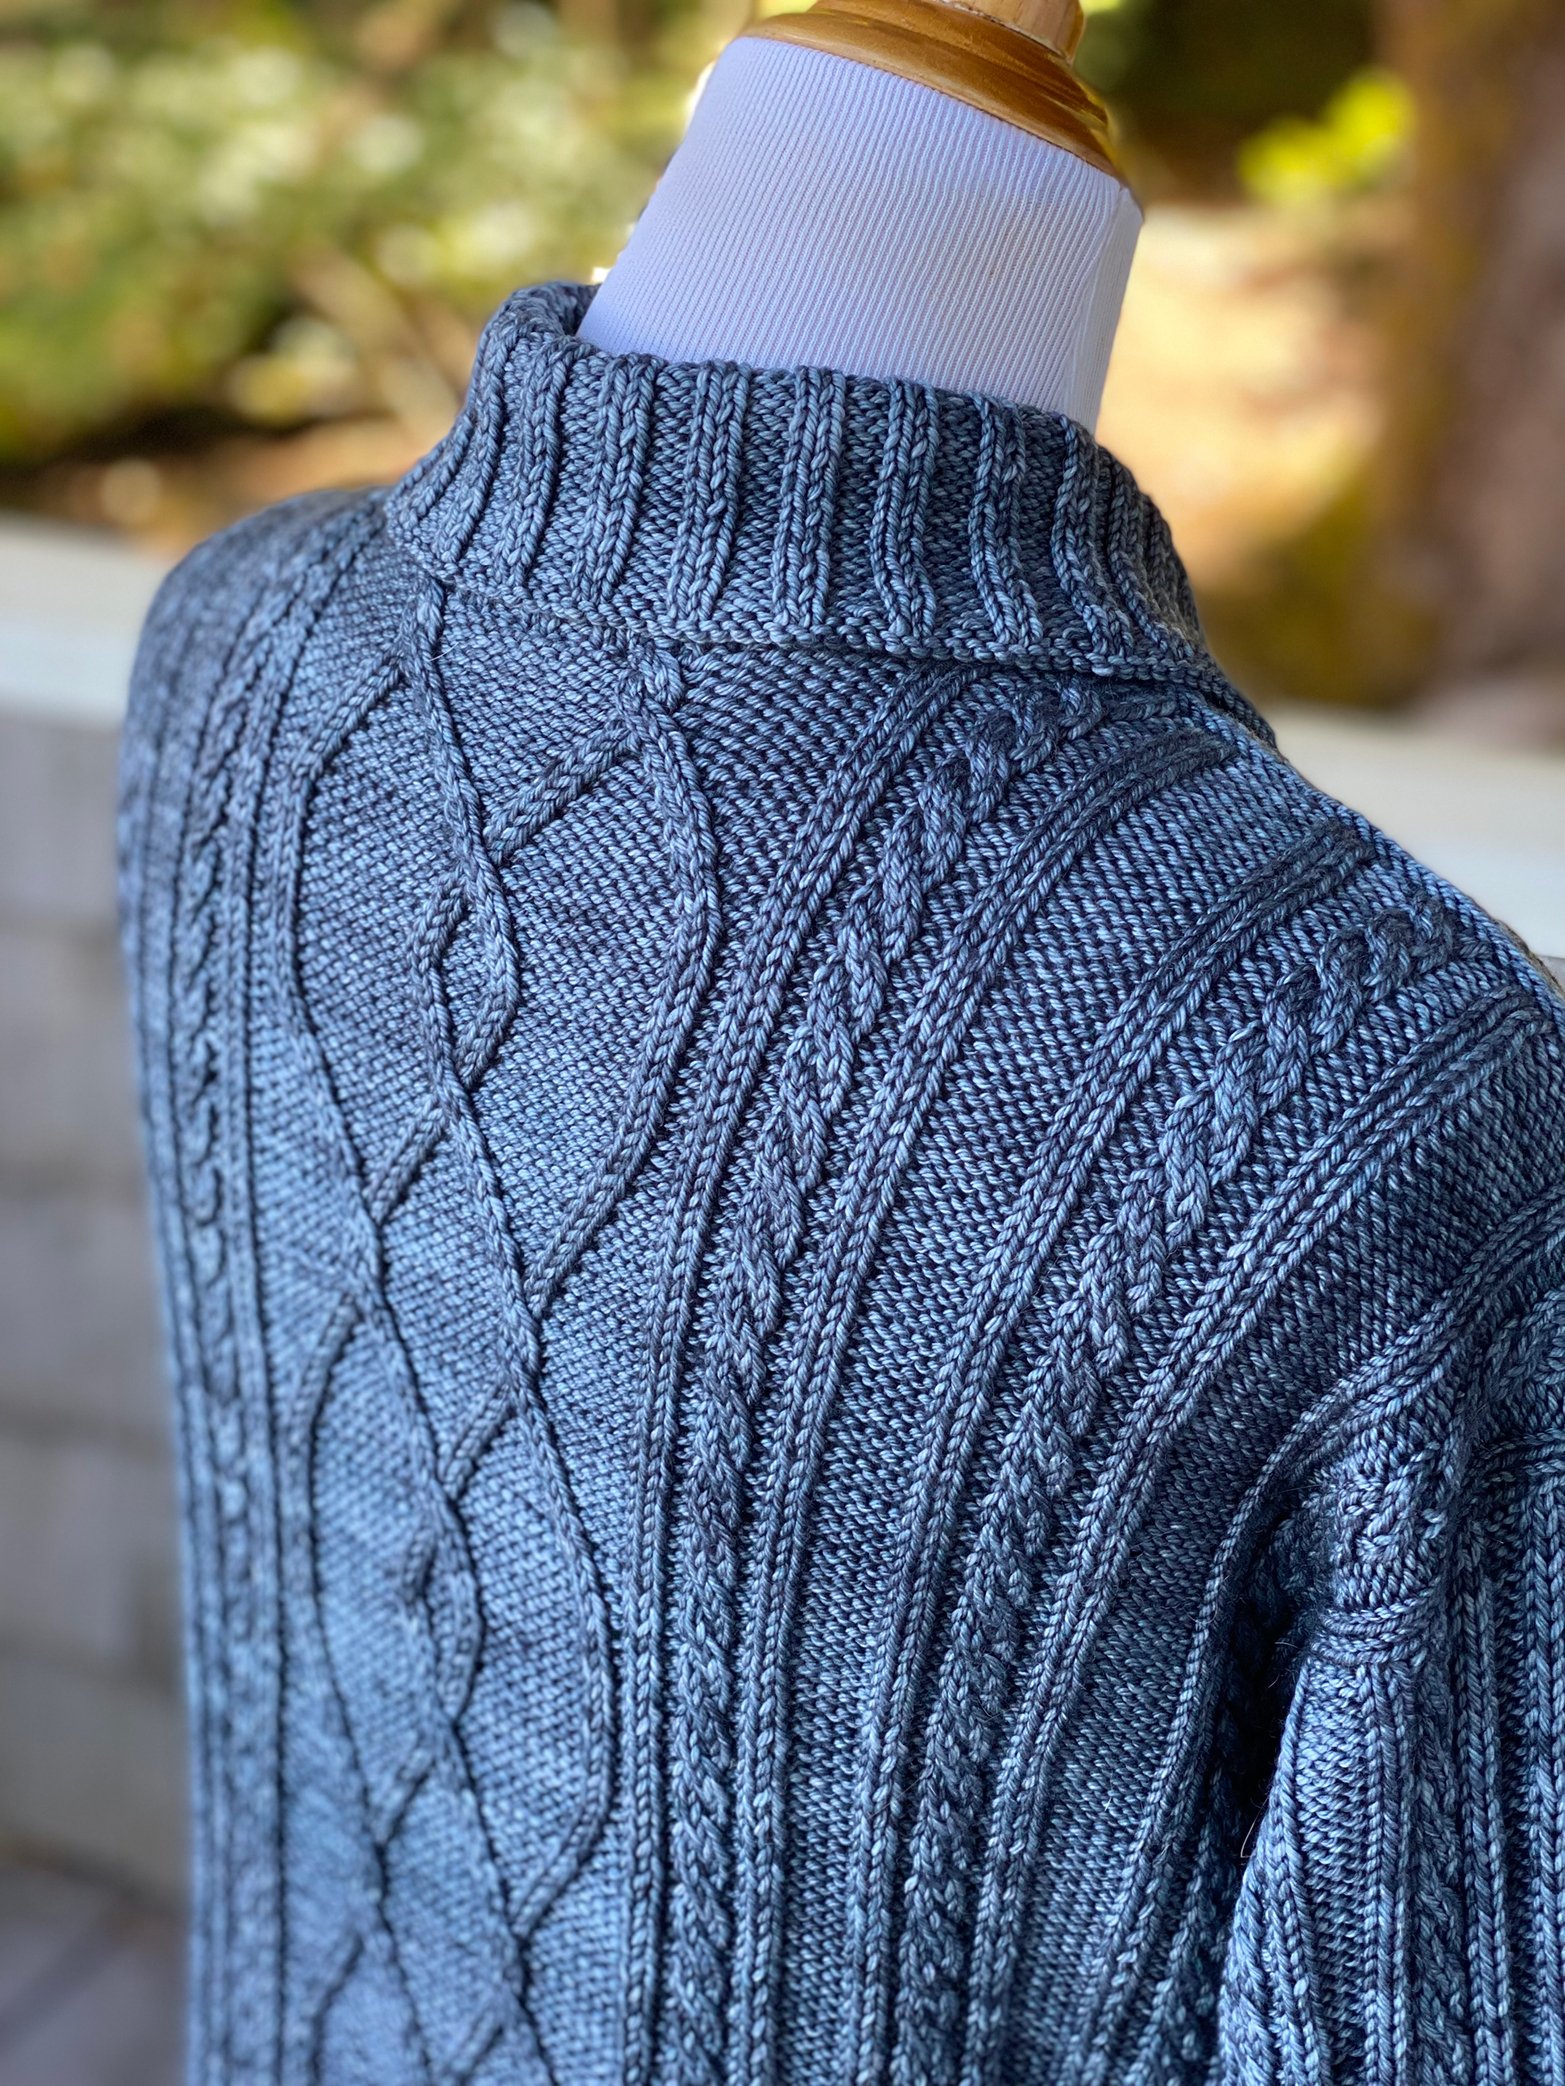 tryon-creek-cardigan-knitting-pattern-sweater — Knit for the Soul by ...